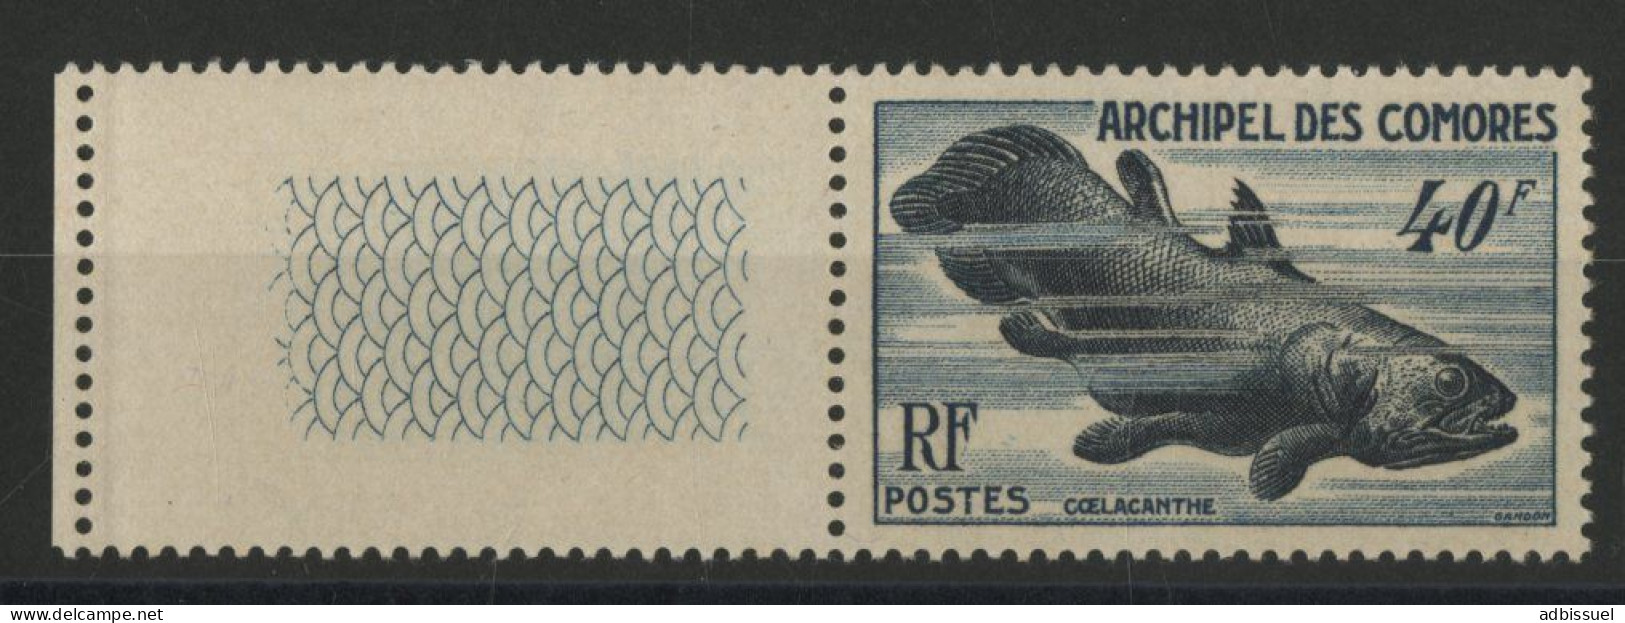 COMORES N° 13 Neuf ** (MNH) Cote 36 €  40 Fr COELACANTHE + Bord De Feuille - Unused Stamps